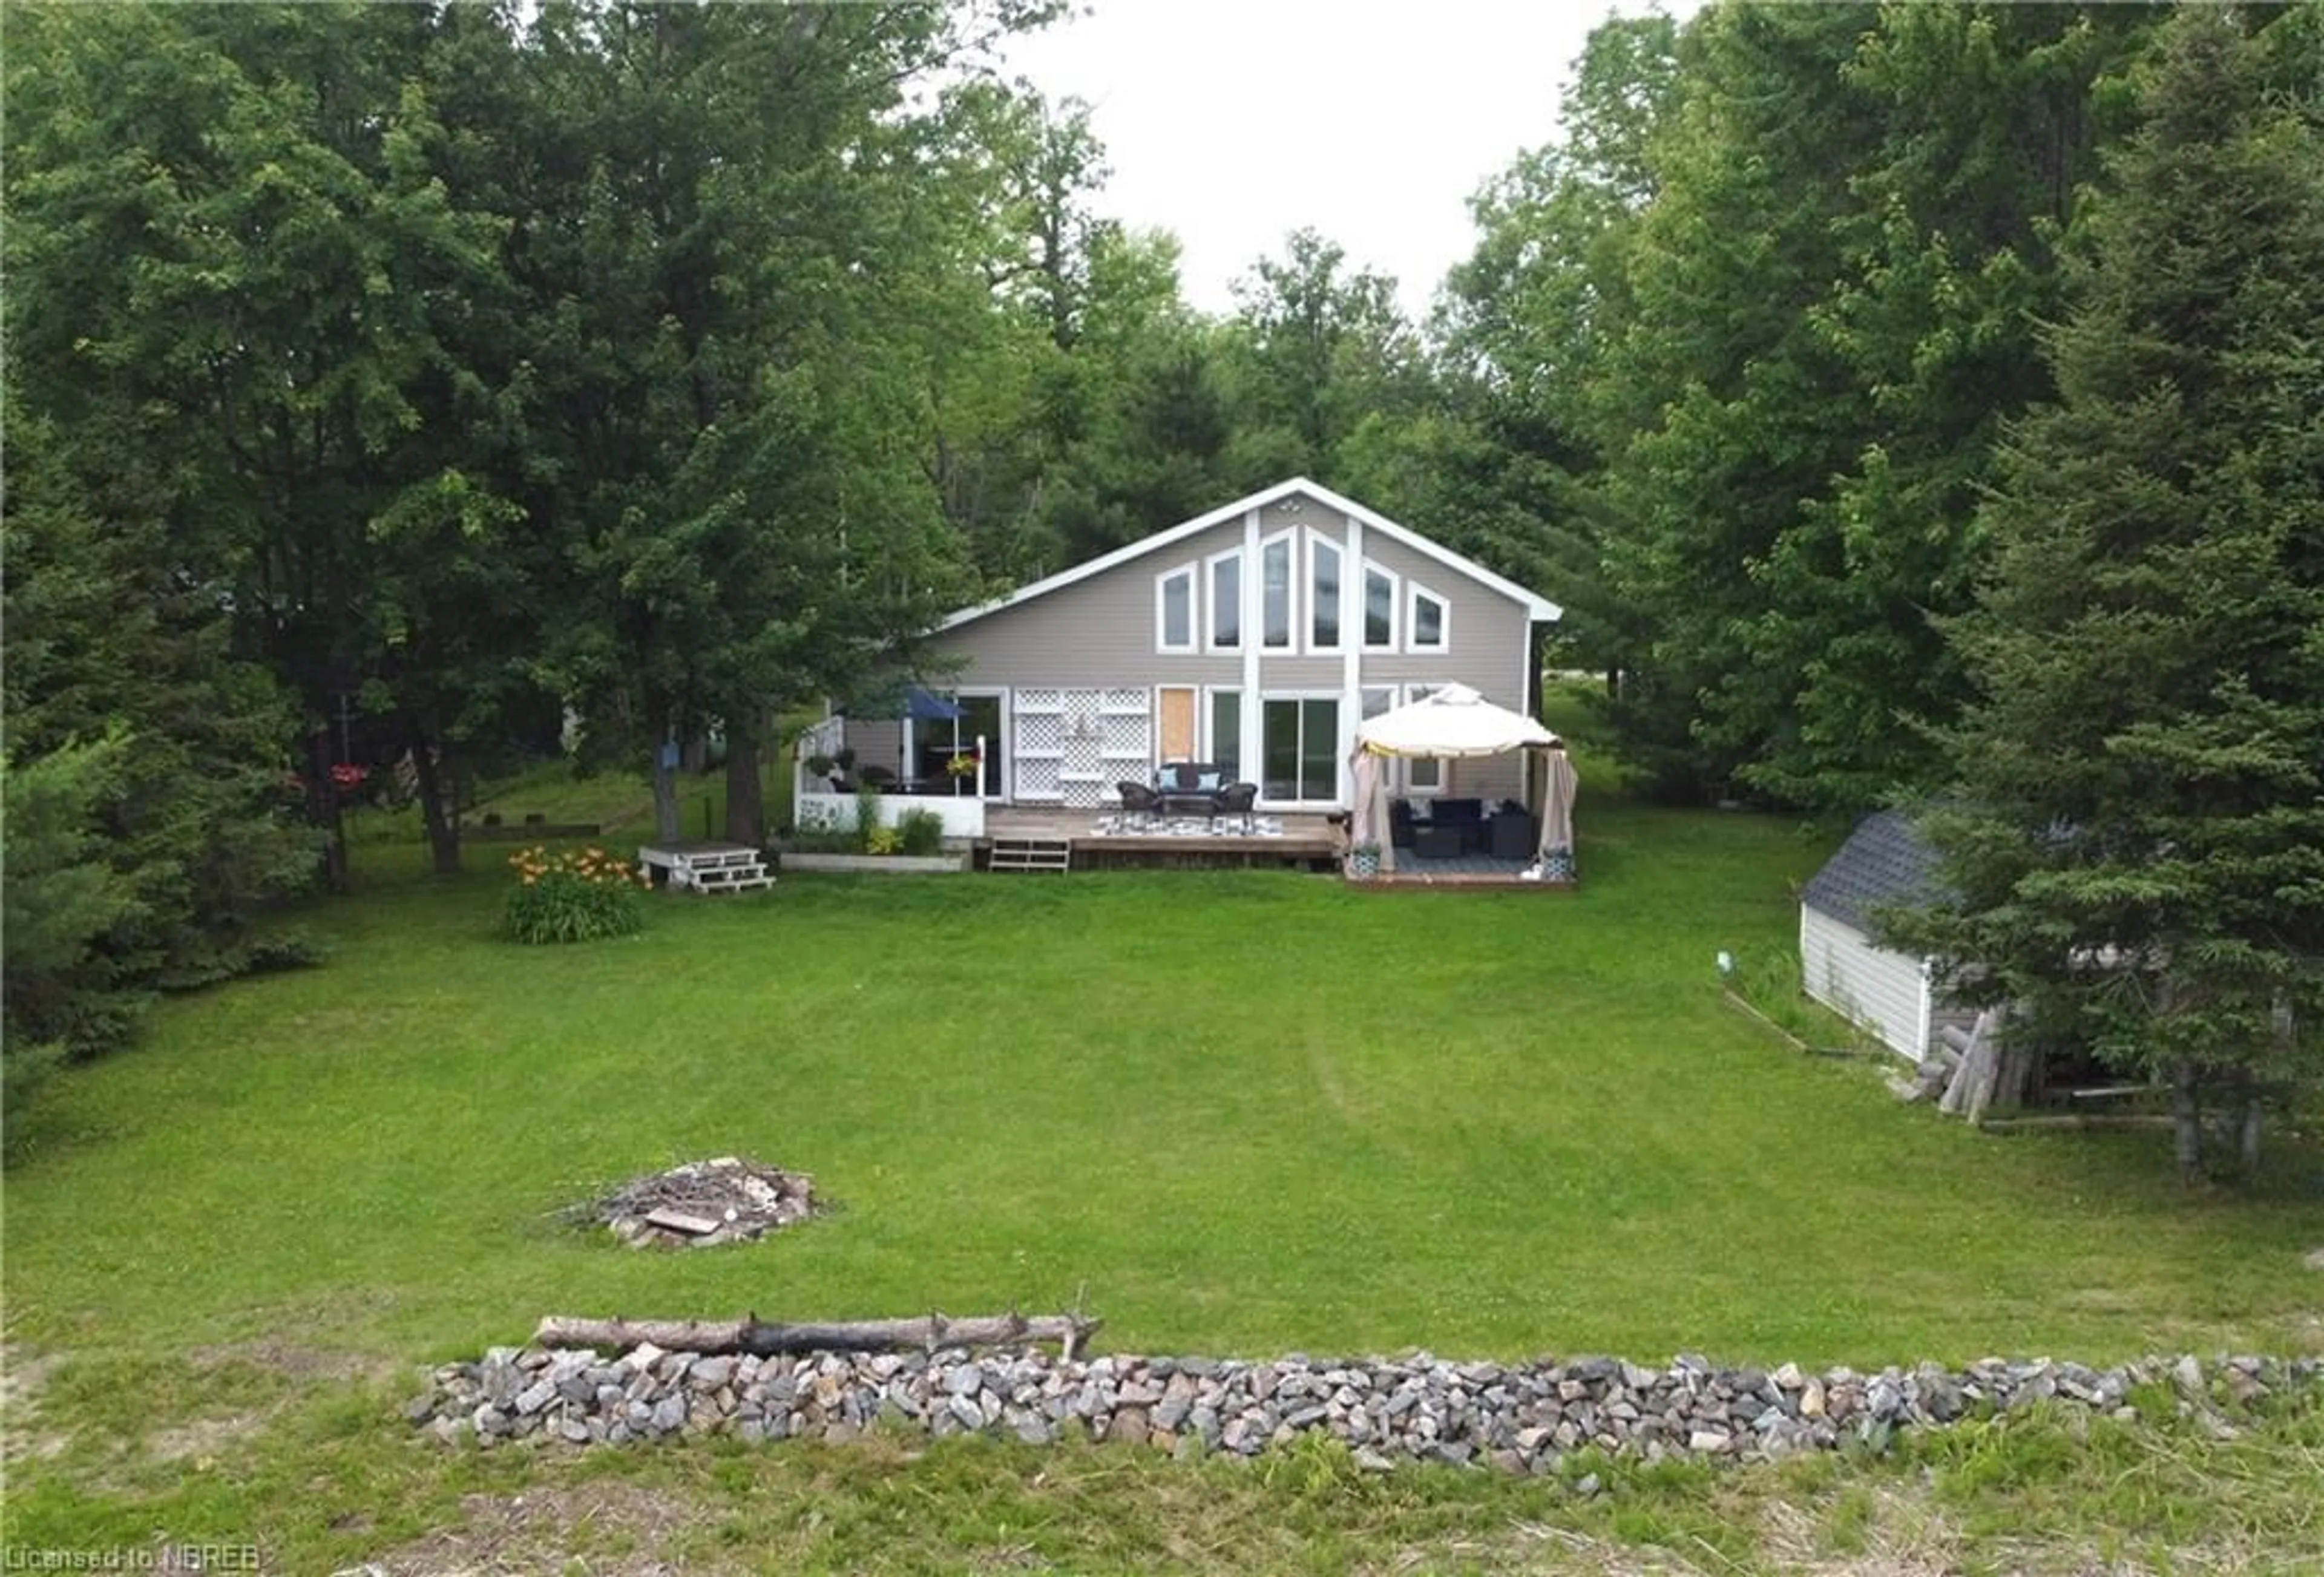 Outside view for 1315 Jocko Point Rd, North Bay Ontario P1B 8G5